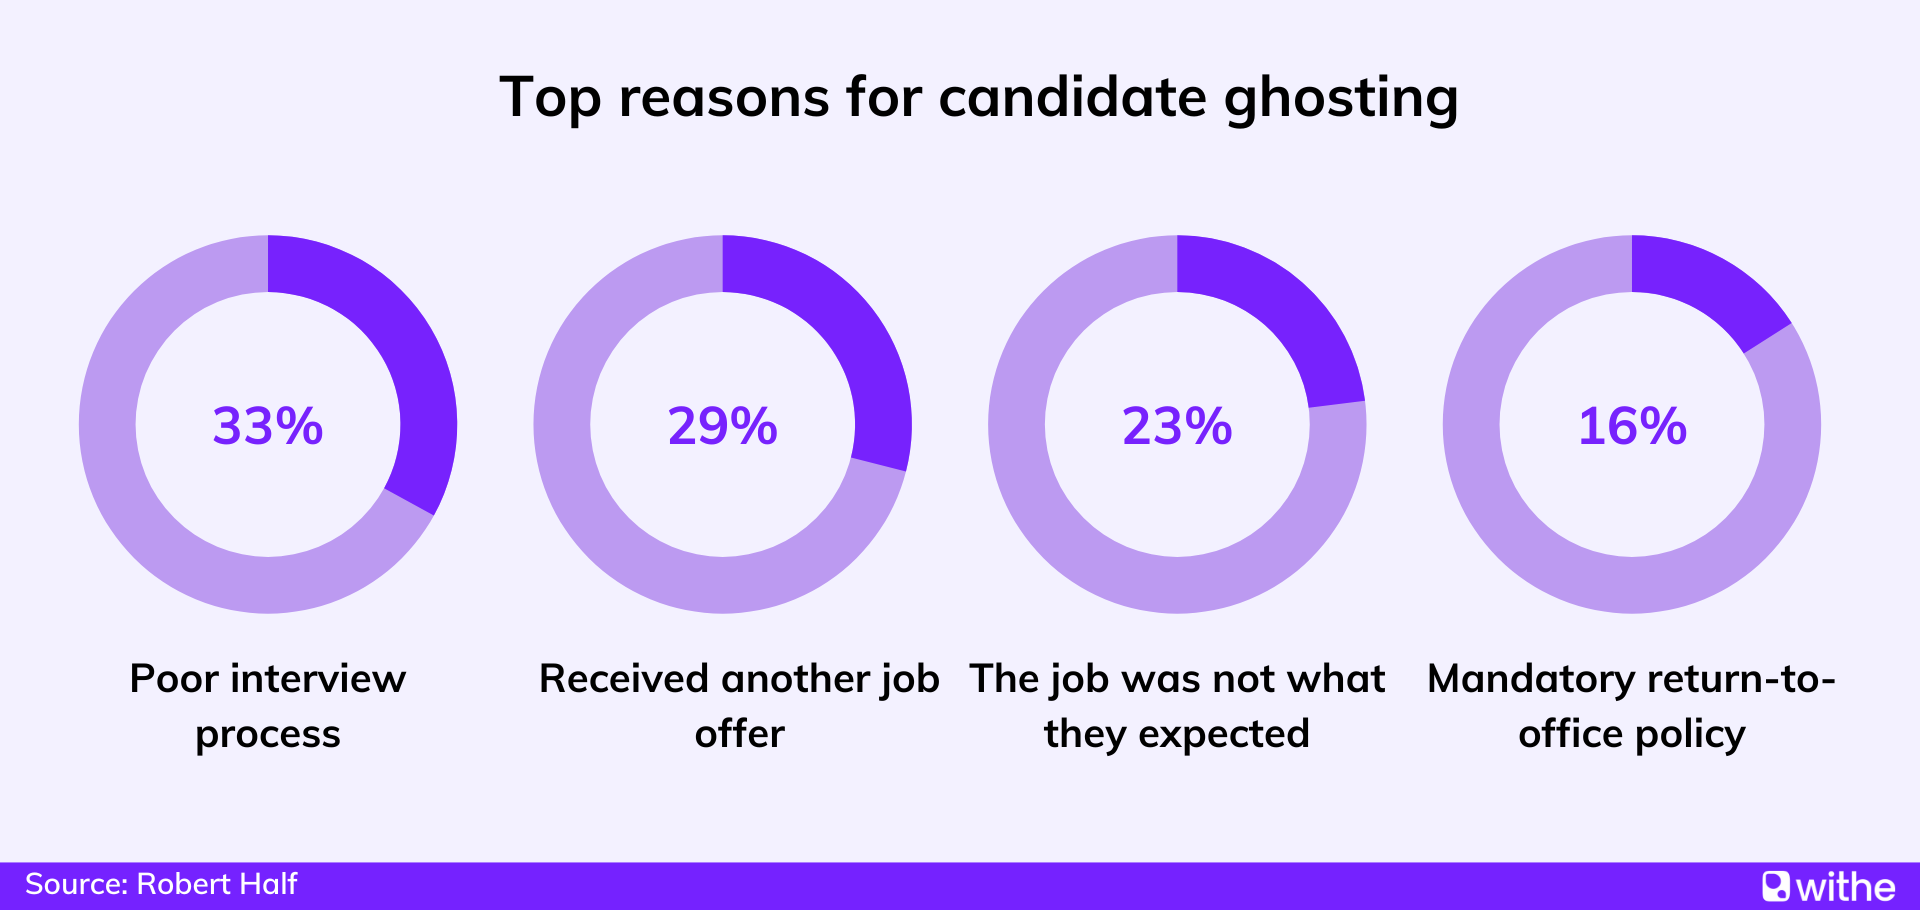 Job interview statistics - Top reasons for candidate ghosting